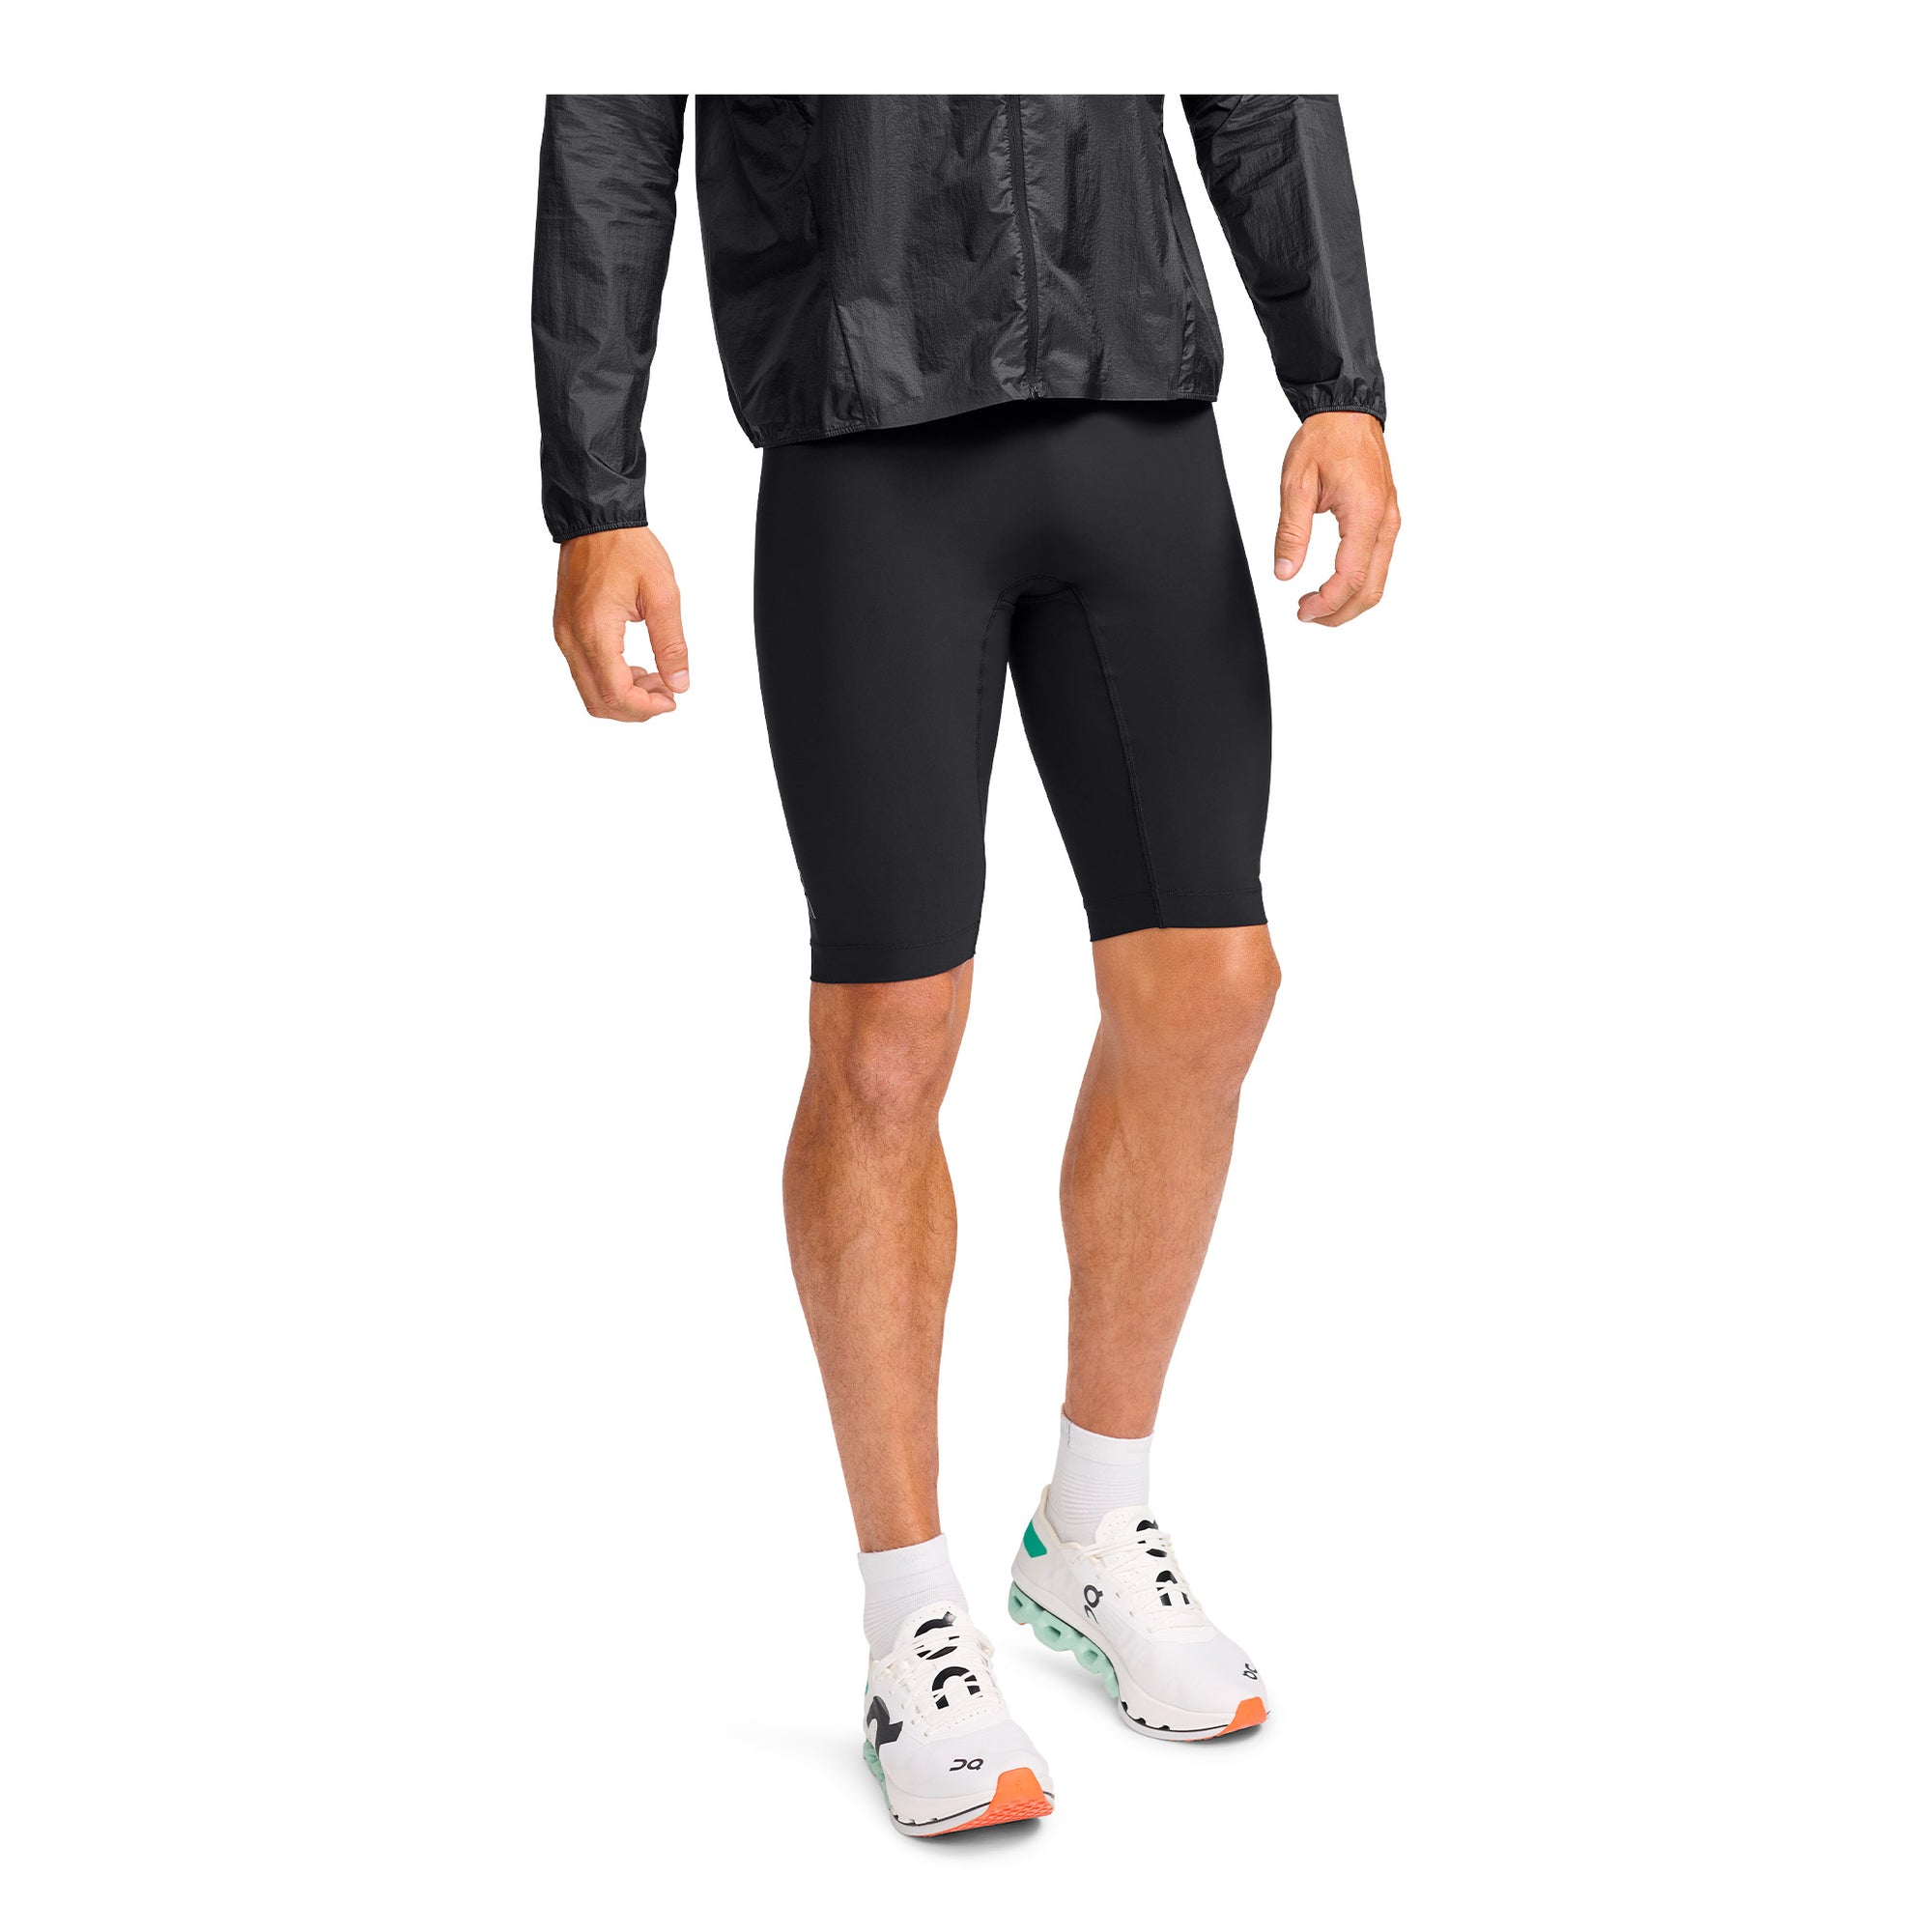 ON RACE TIGHTS HALF - HOMME